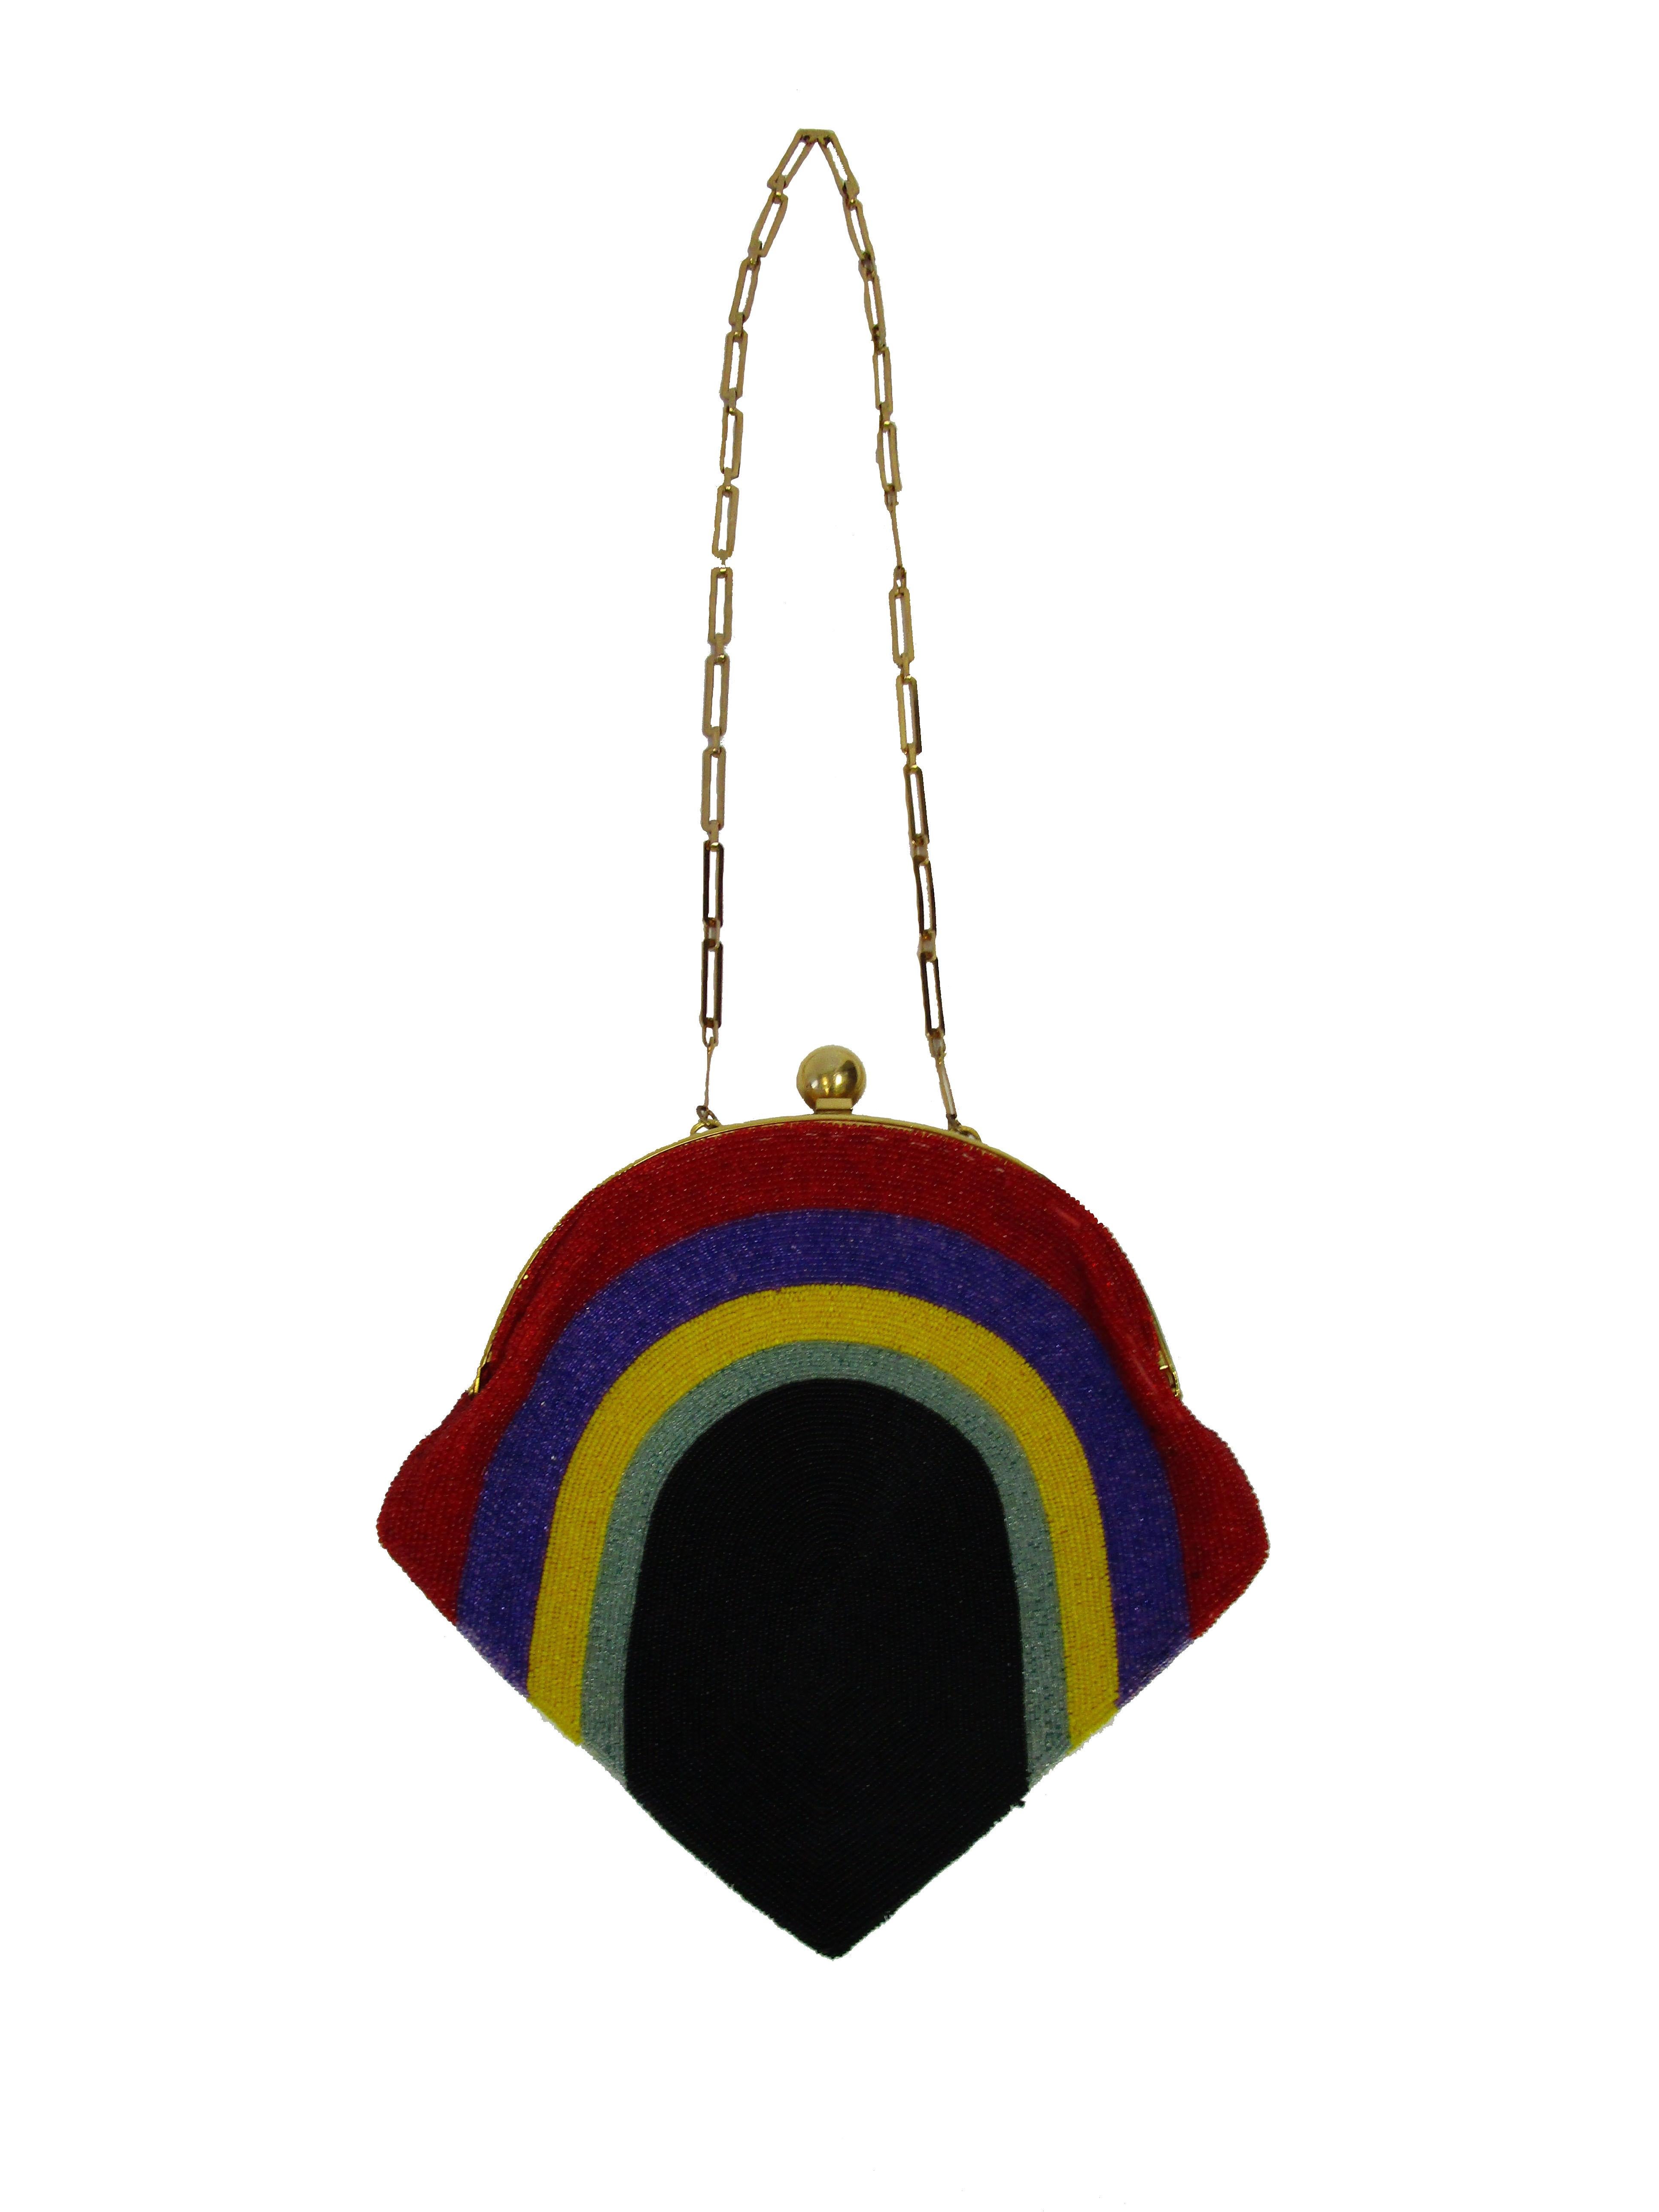 Vintage Pierre Cardin evening purse. The body of this gorgeous, fully beaded purse features five graphic rainbow-like loops of color in red, purple, yellow, sage green, and black. The finely crafted purse has an optional 13' gold-tone bar chain